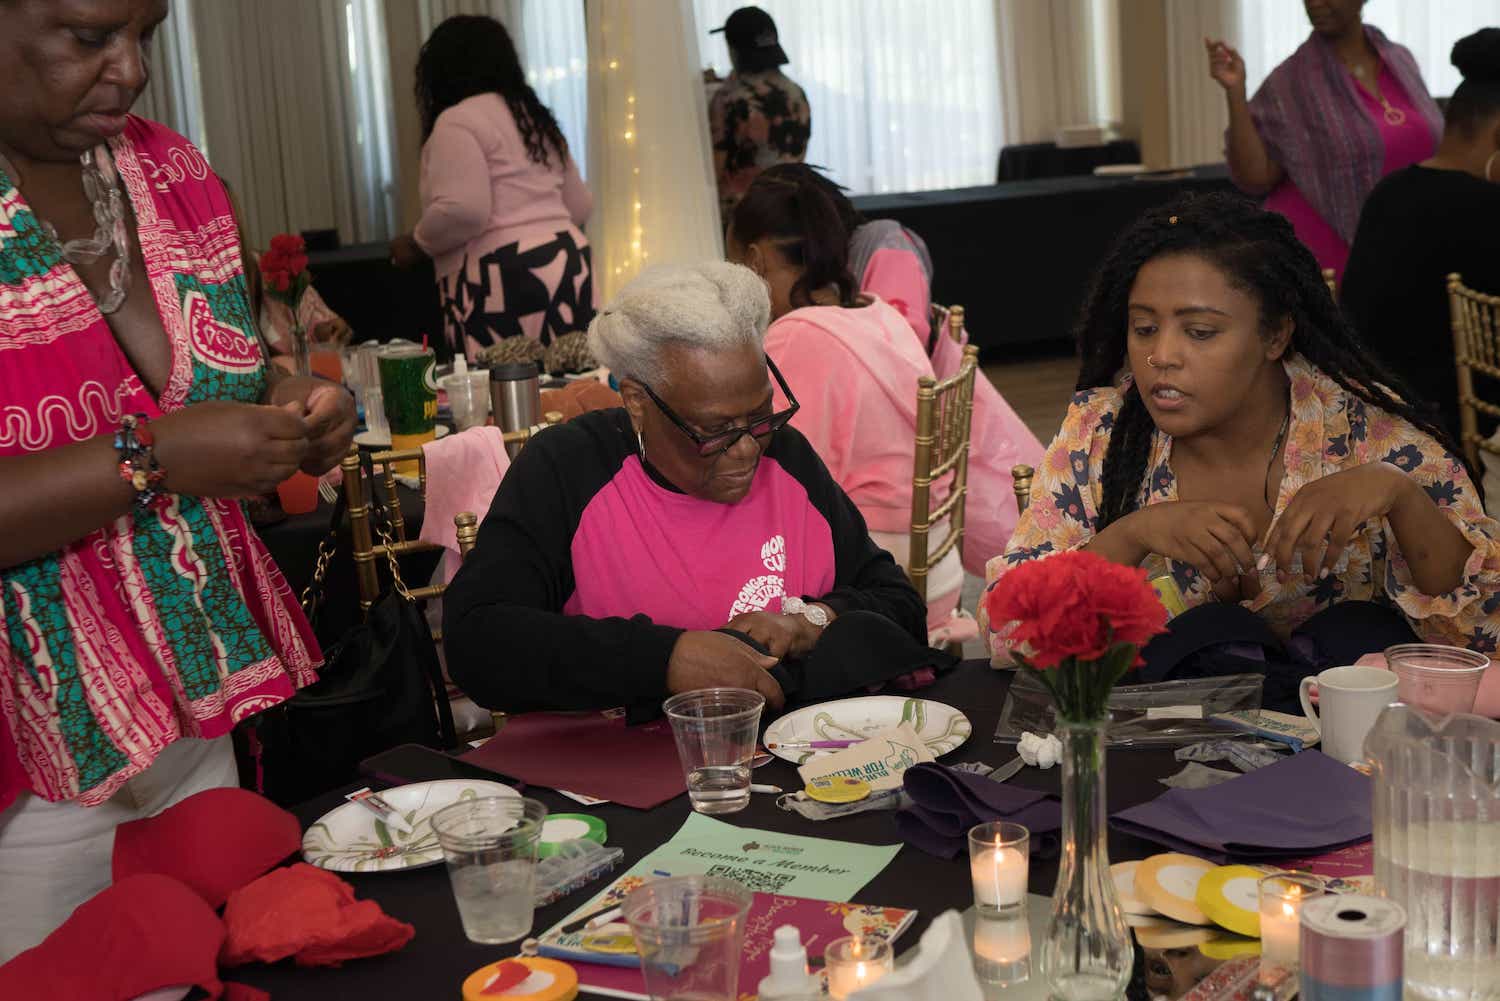 Black Women for Wellness Annual Risqué Breast Health Conference 26